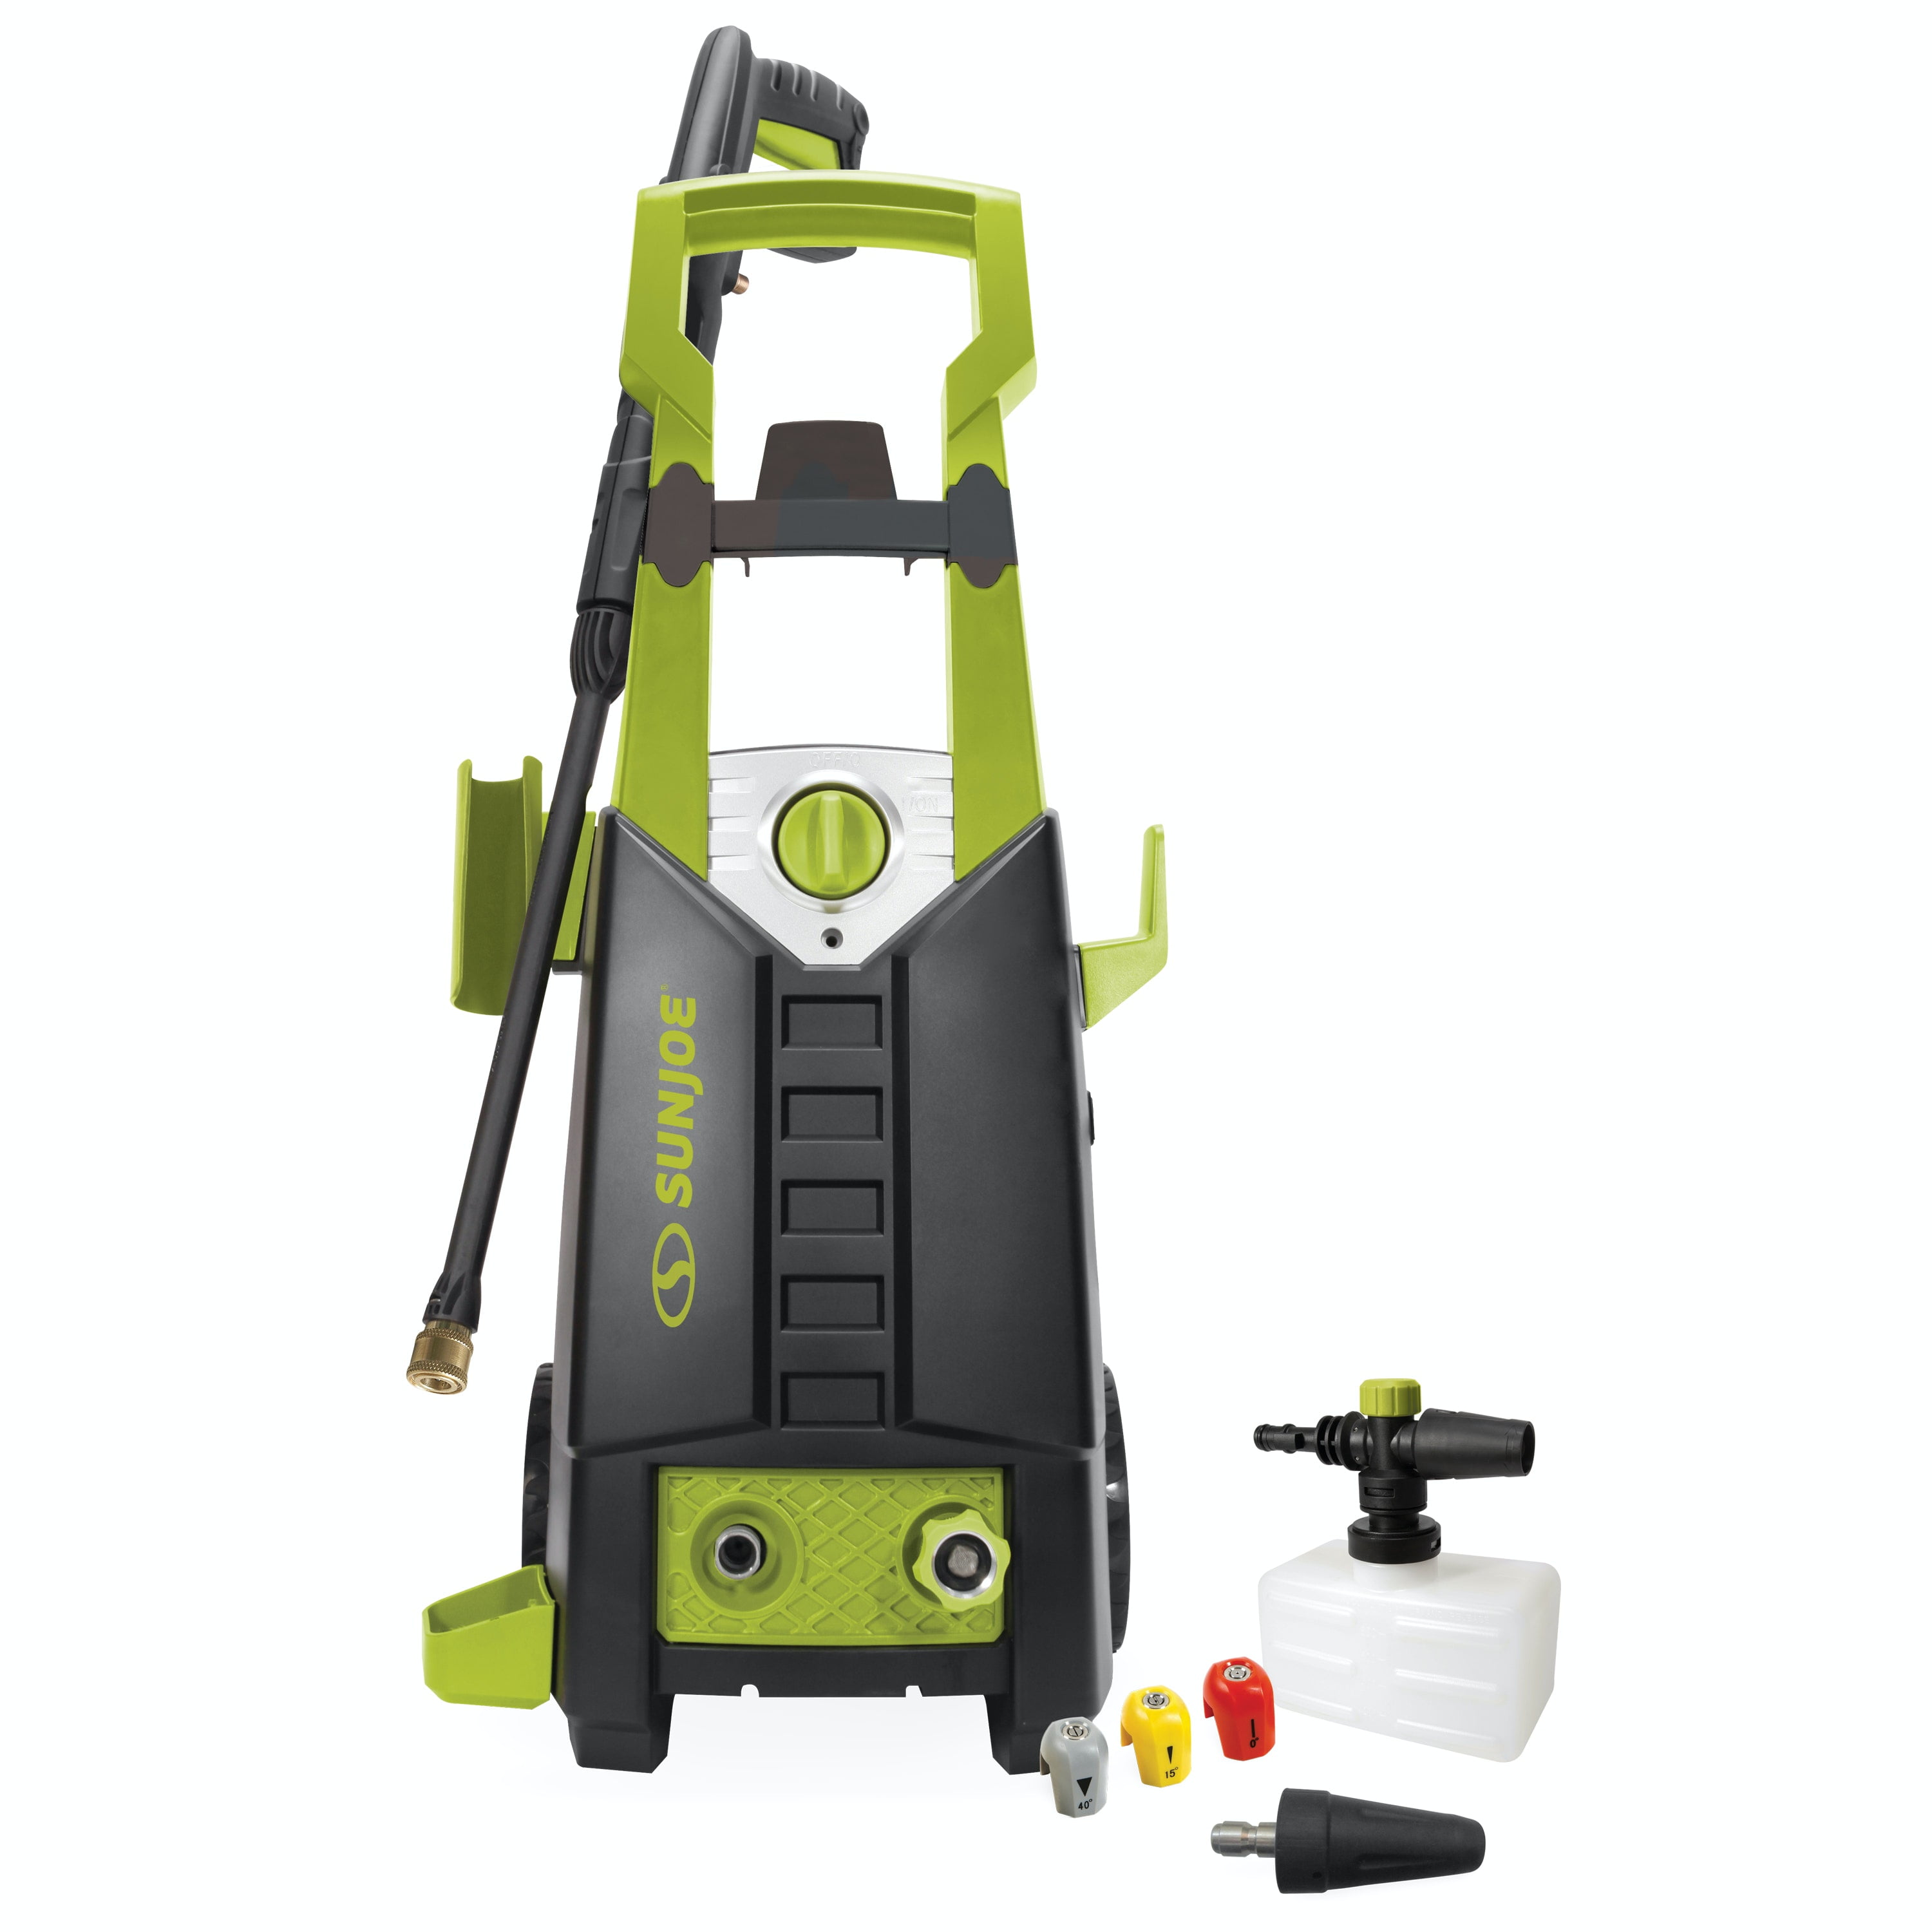 Sun Joe SPX2598-ELT Electric Pressure Washer W/ Extension Wand and High Pressure Lance, 2050 PSI Max, 1.65 GPM Max